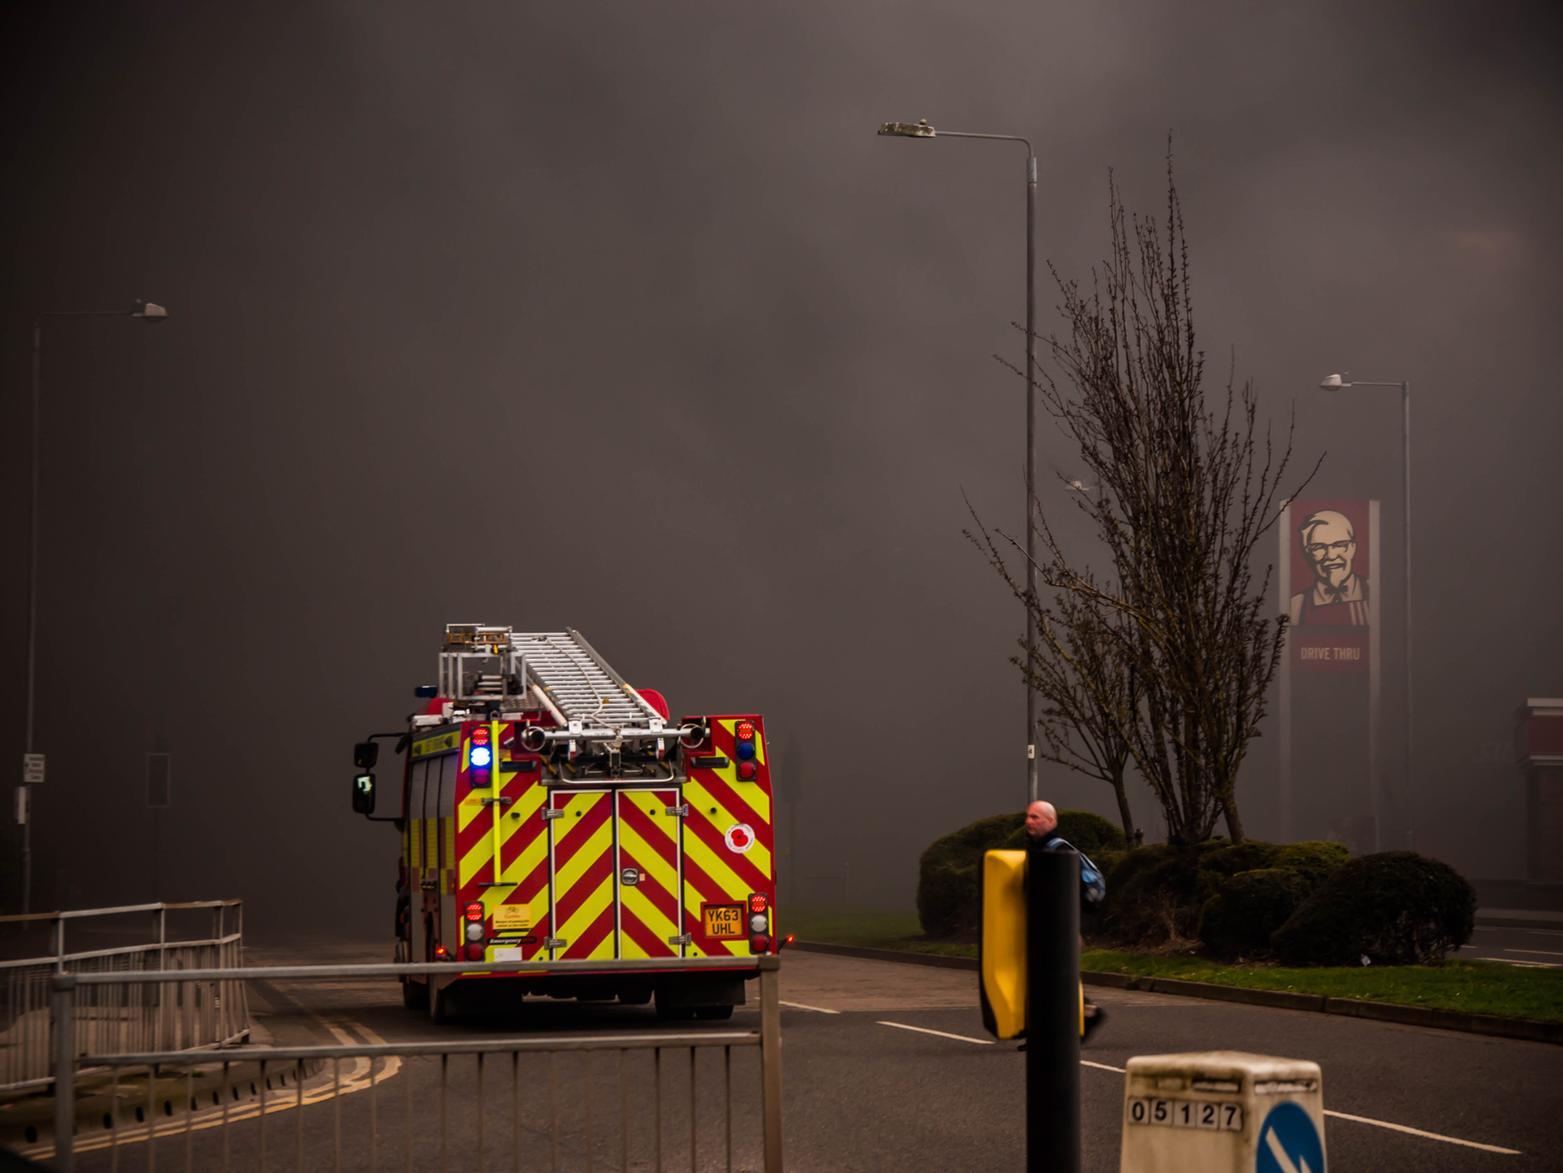 Dark smoke descended over Wakefield Retail Park on Saturday after the fire was first reported shortly after 1pm.